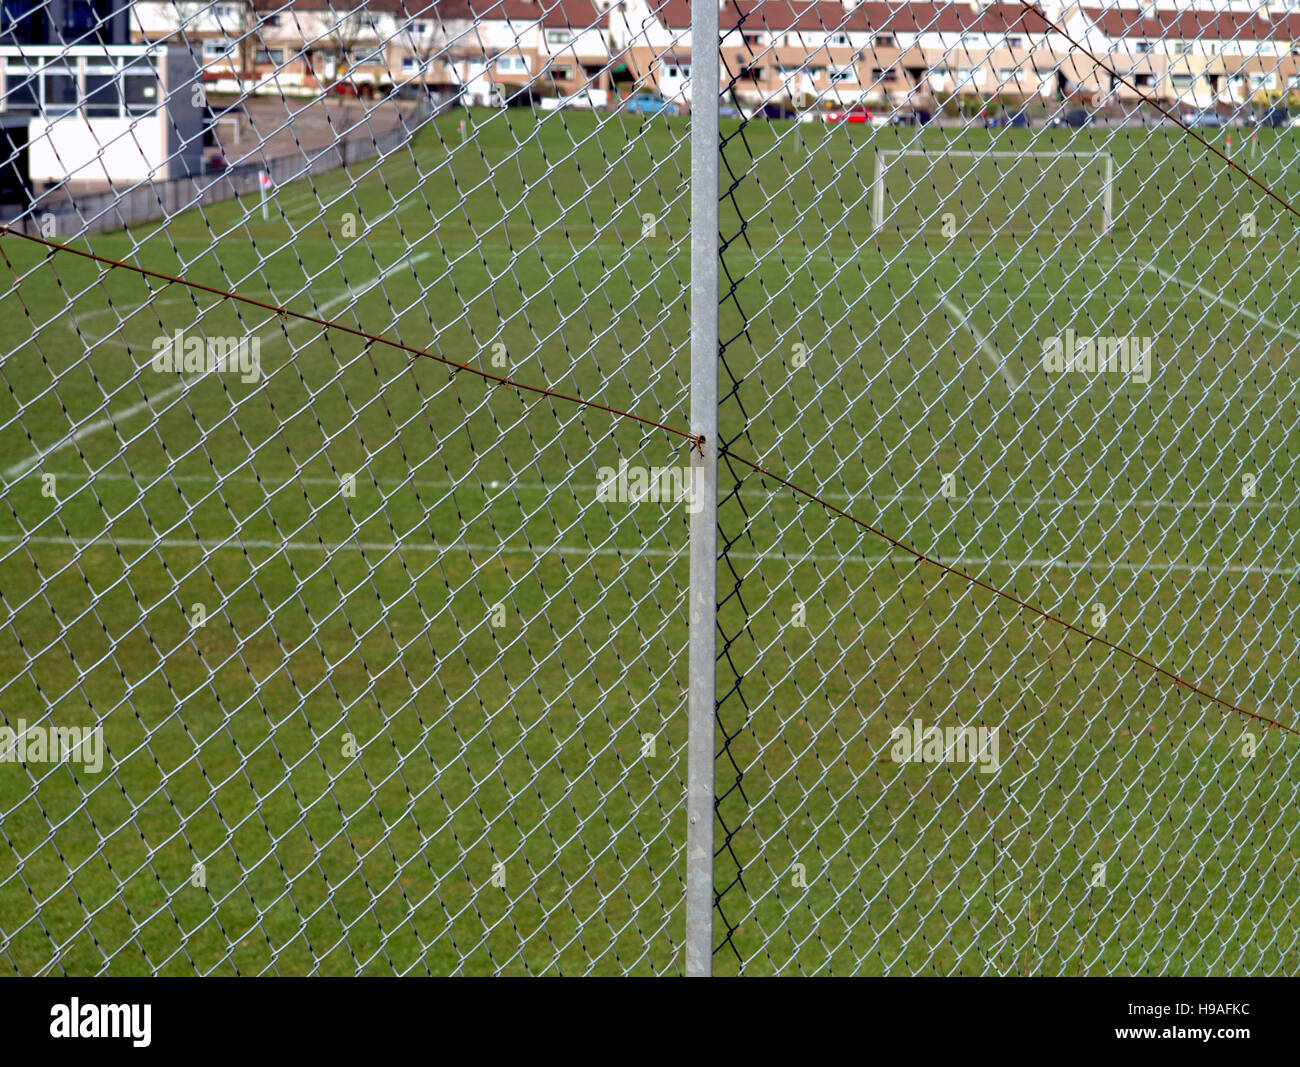 school football soccer  pitch shot through wire cage Stock Photo